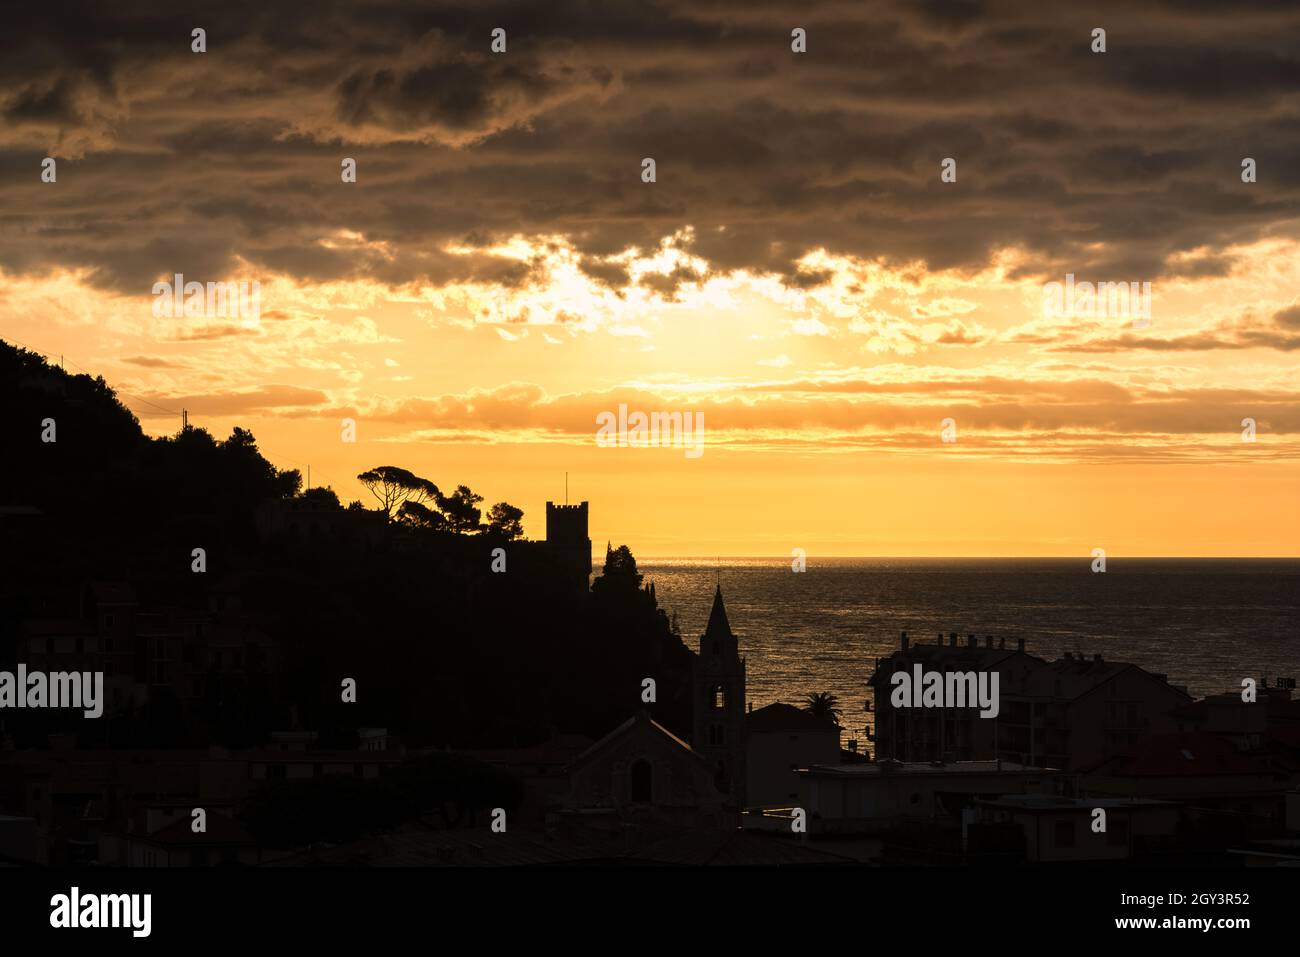 Evening at Finale Ligure, Italy Stock Photo